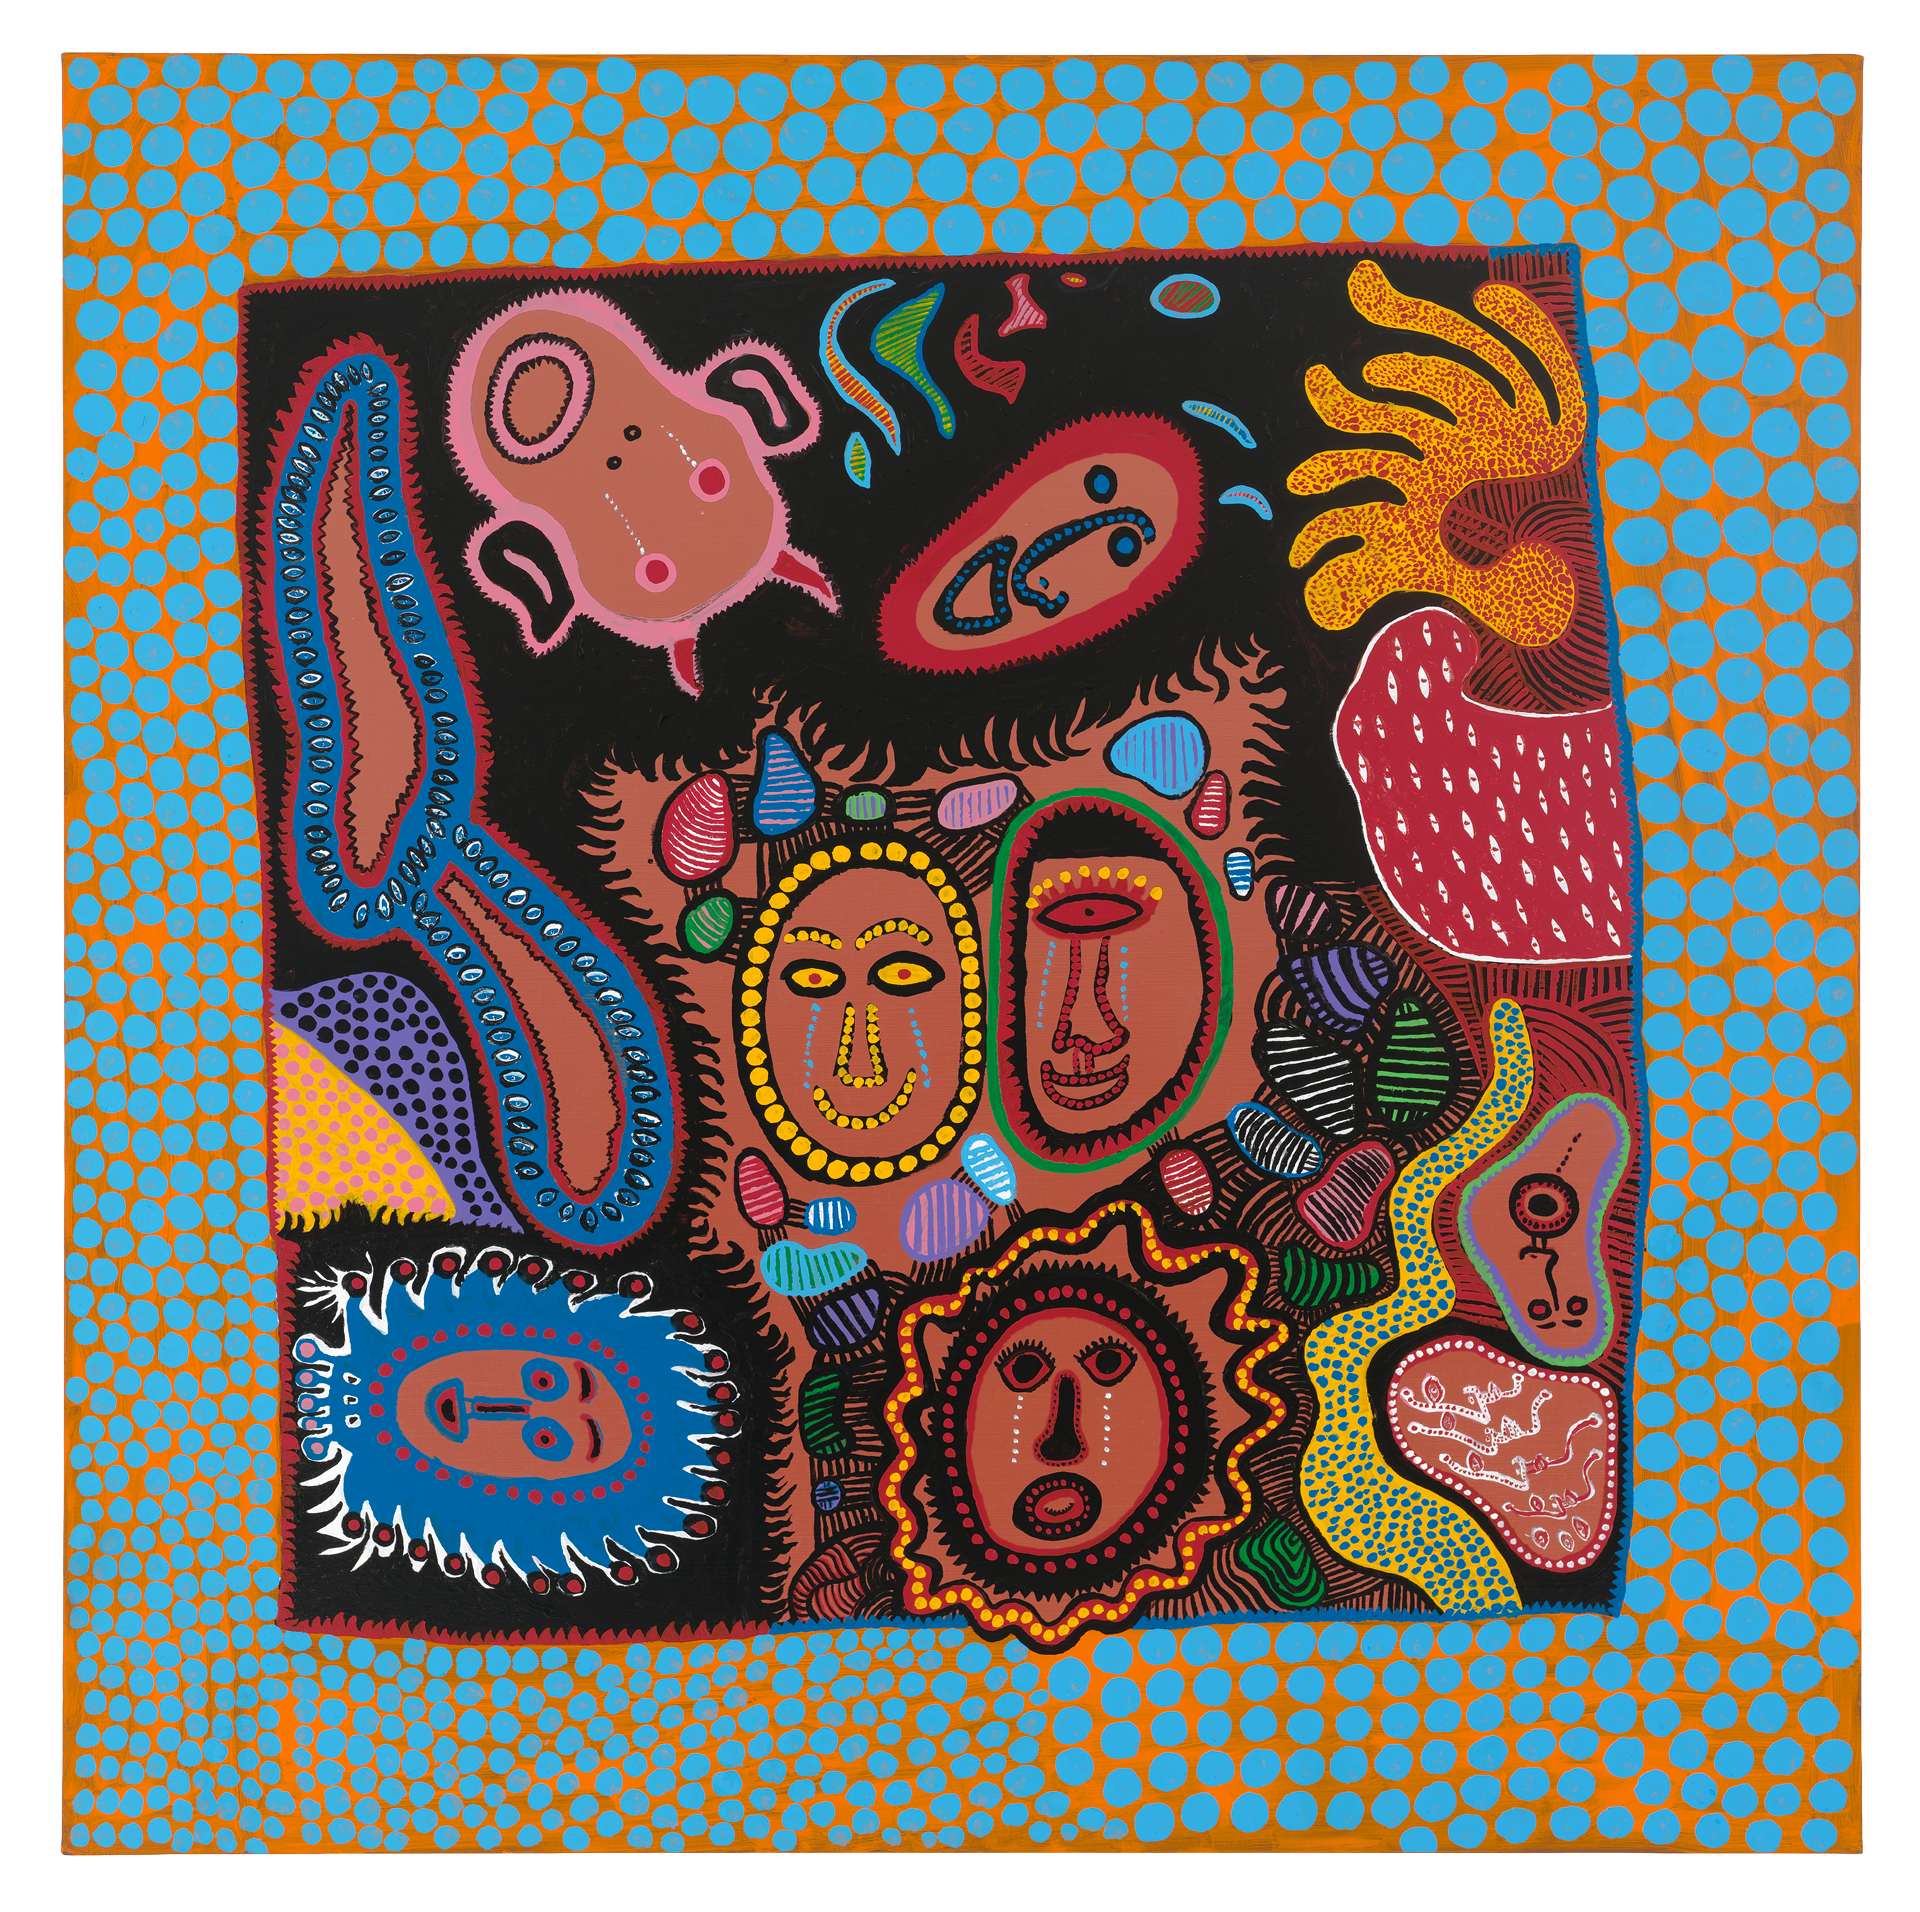 A painting by Yayoi Kusama, titled I WHO CRY IN THE FLOWERING SEASON, dated 2015.